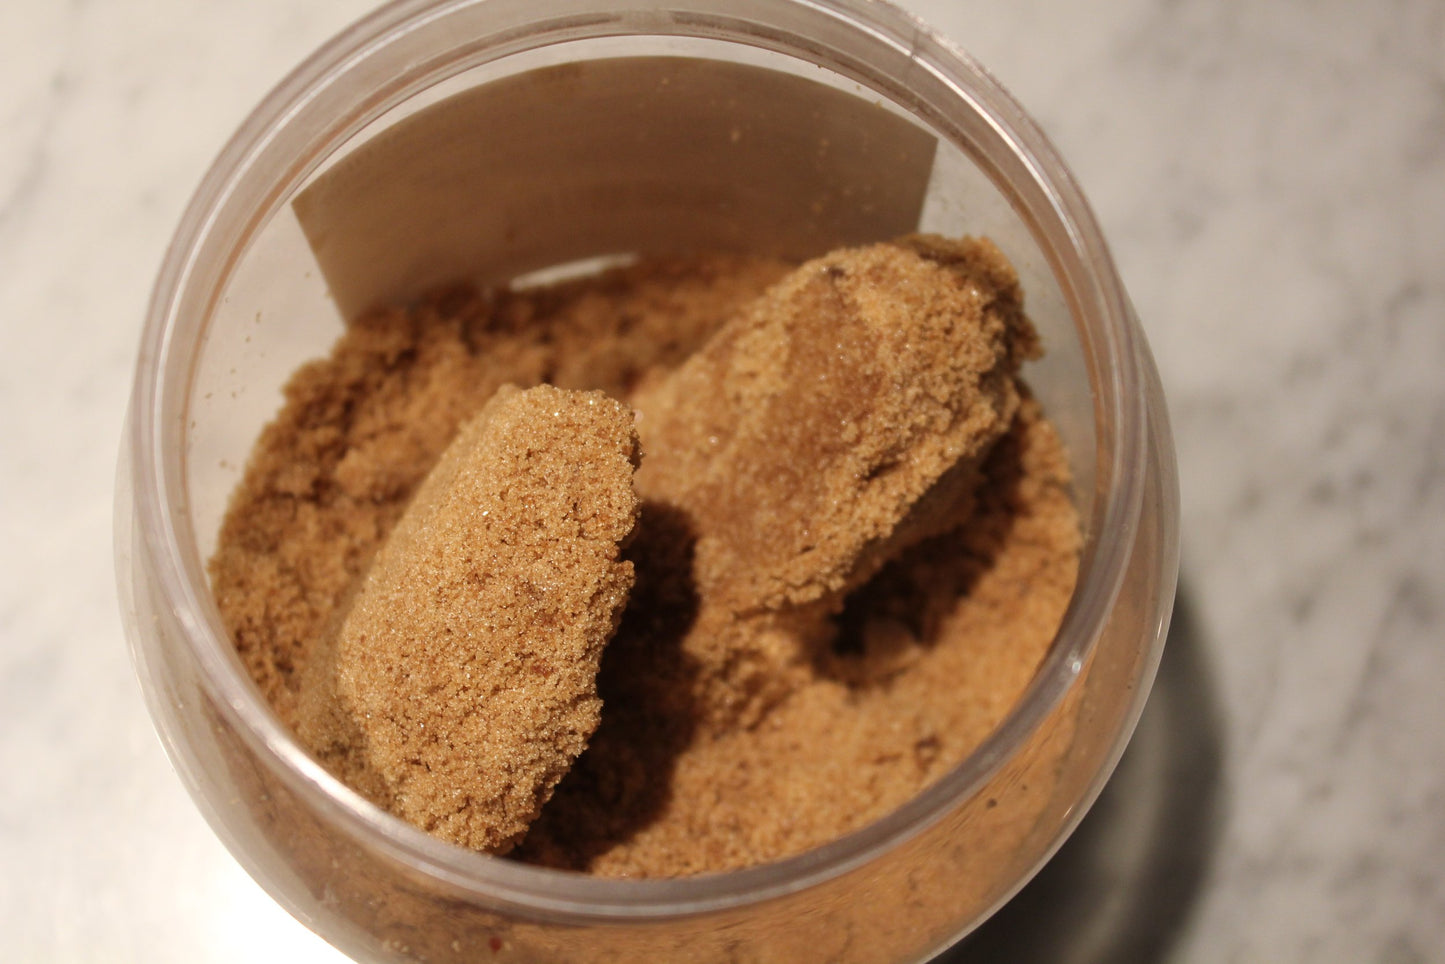 "My Brown Sugar became a rock:- Here's the Kitchen Hack!